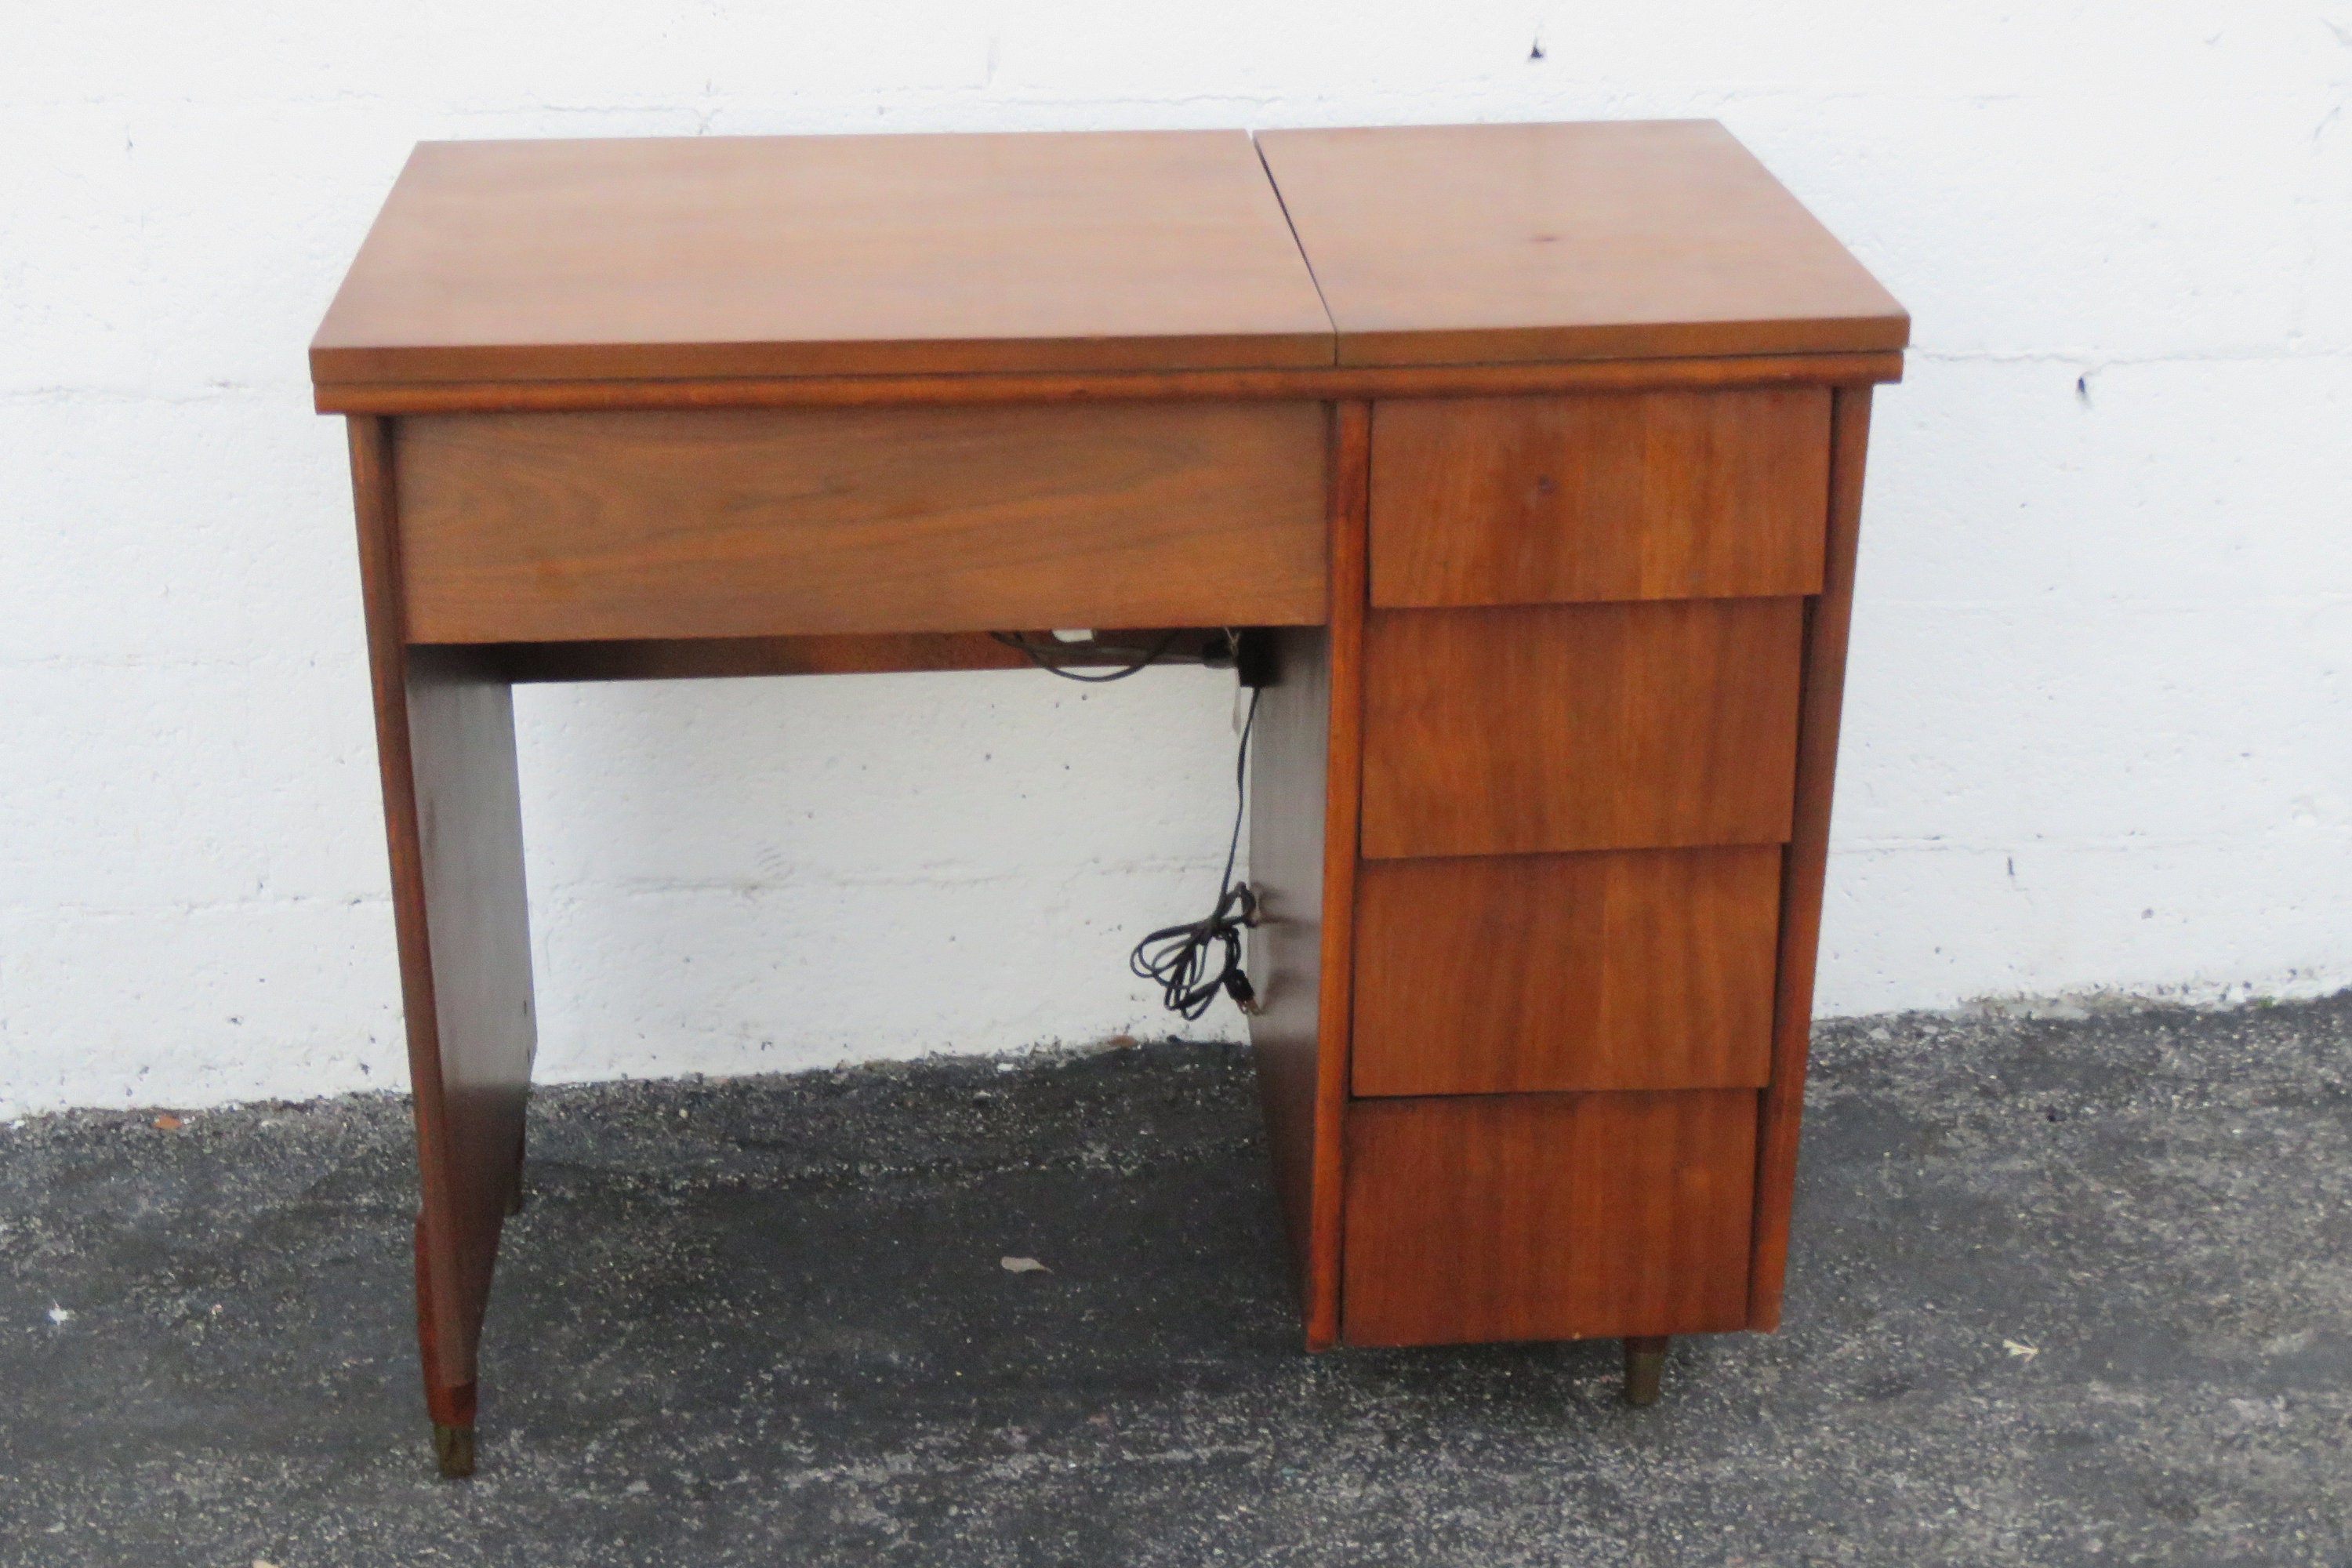 Sold at Auction: Vintage Folding Sewing Table